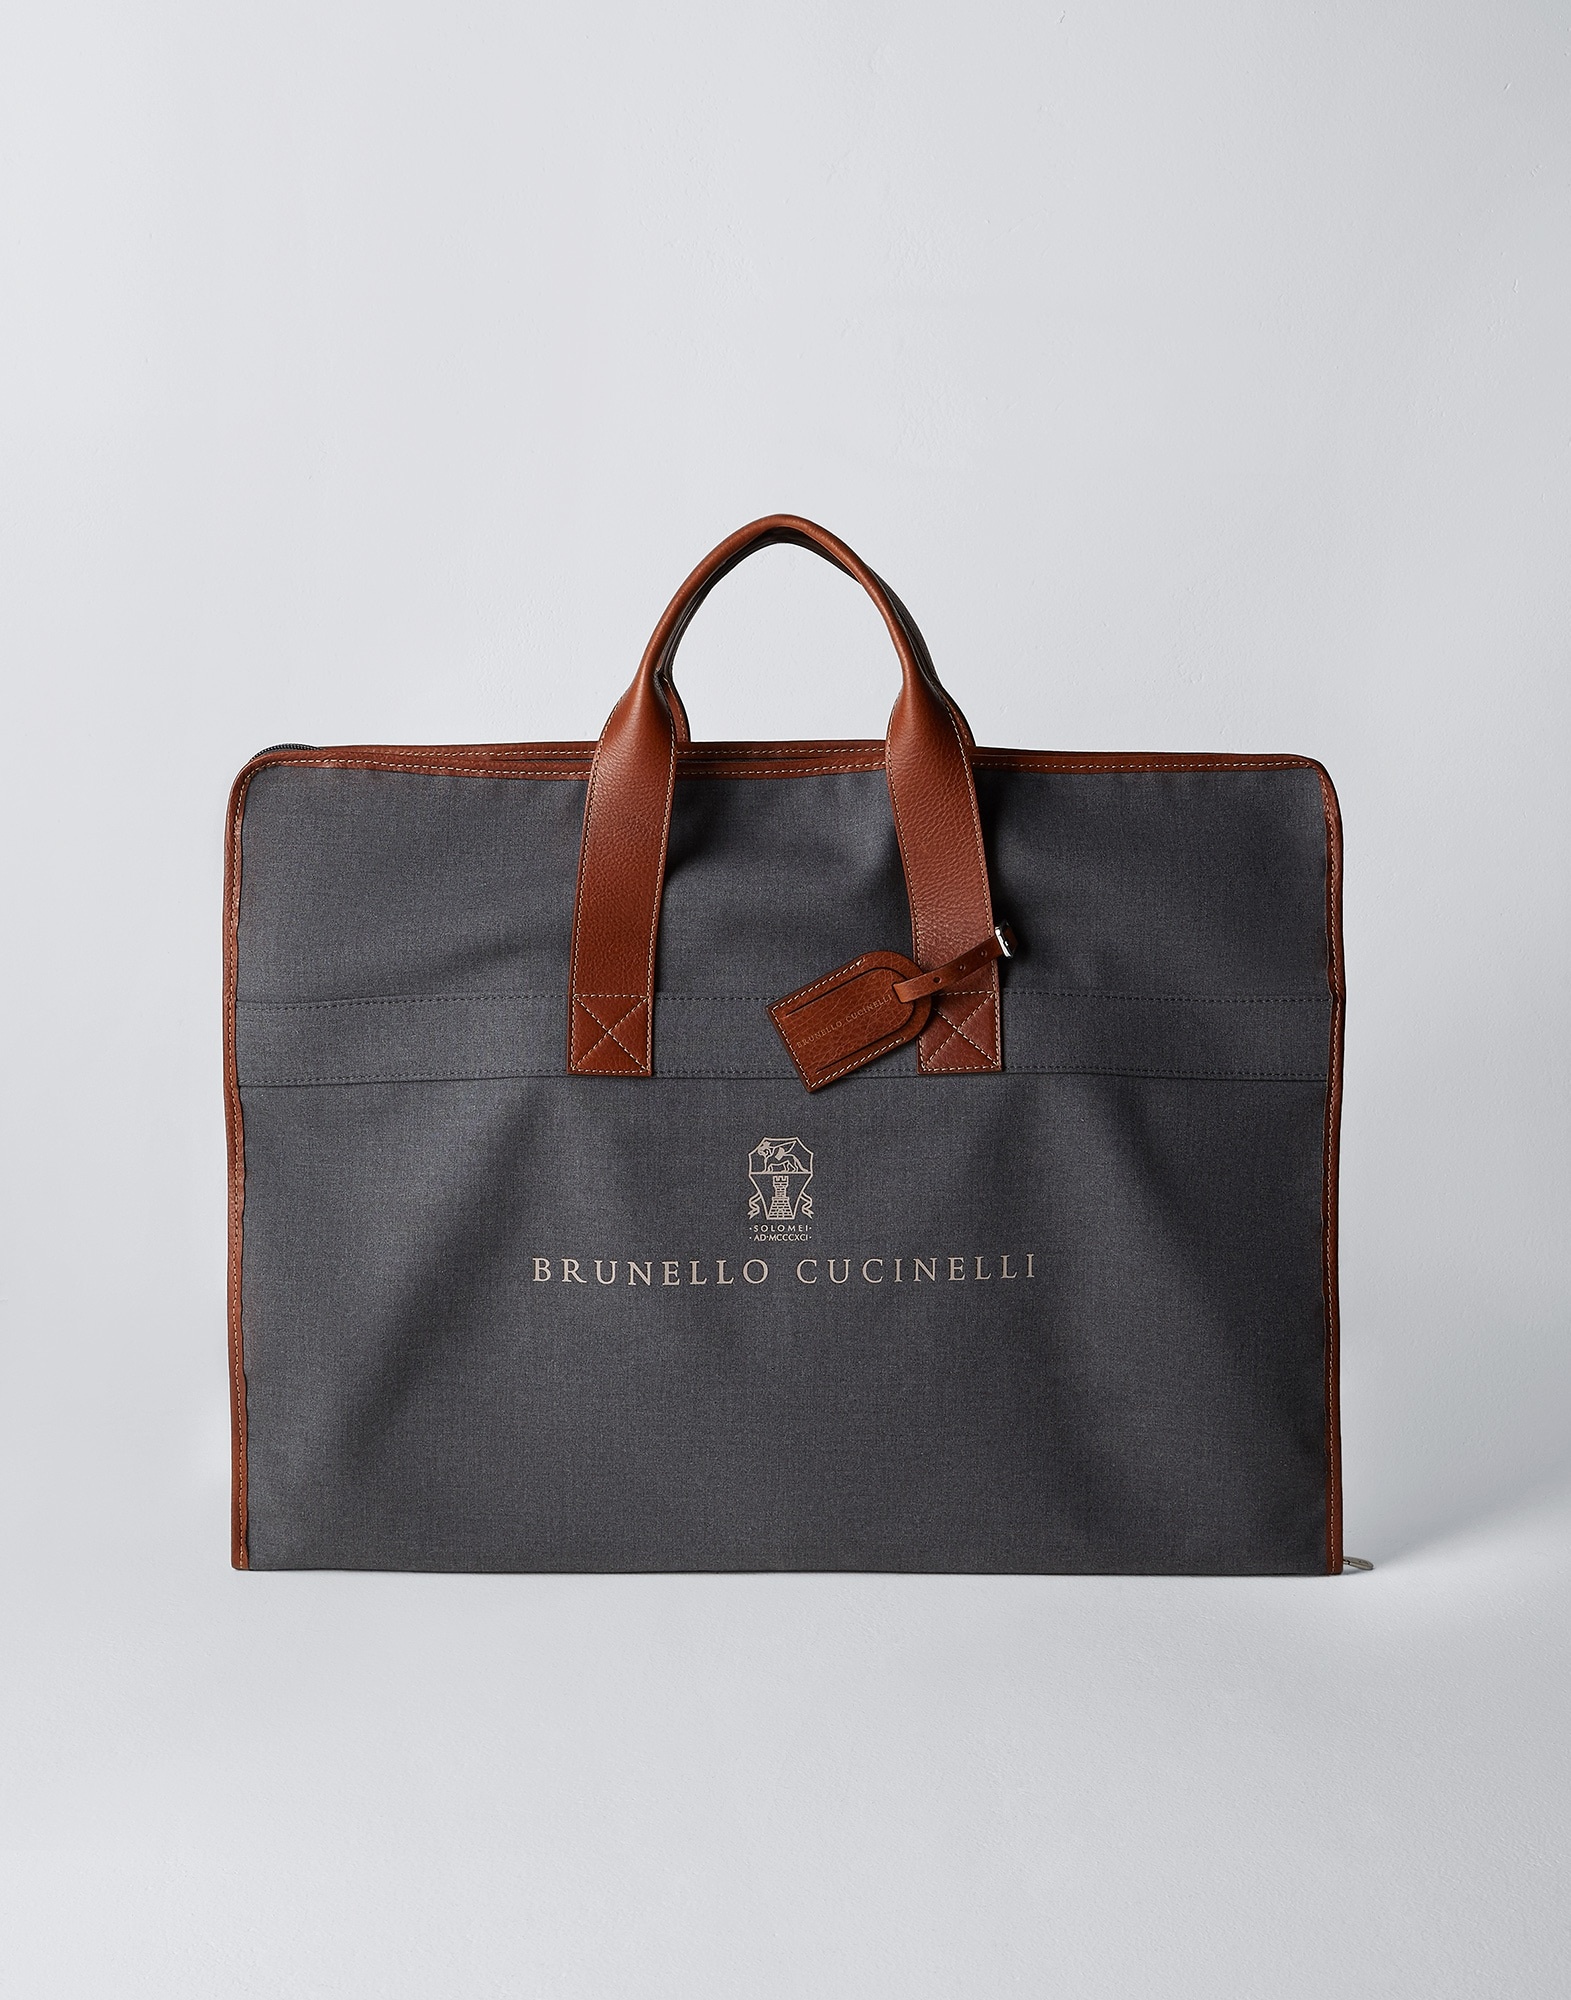 The OS for Brunello Cucinelli Customers